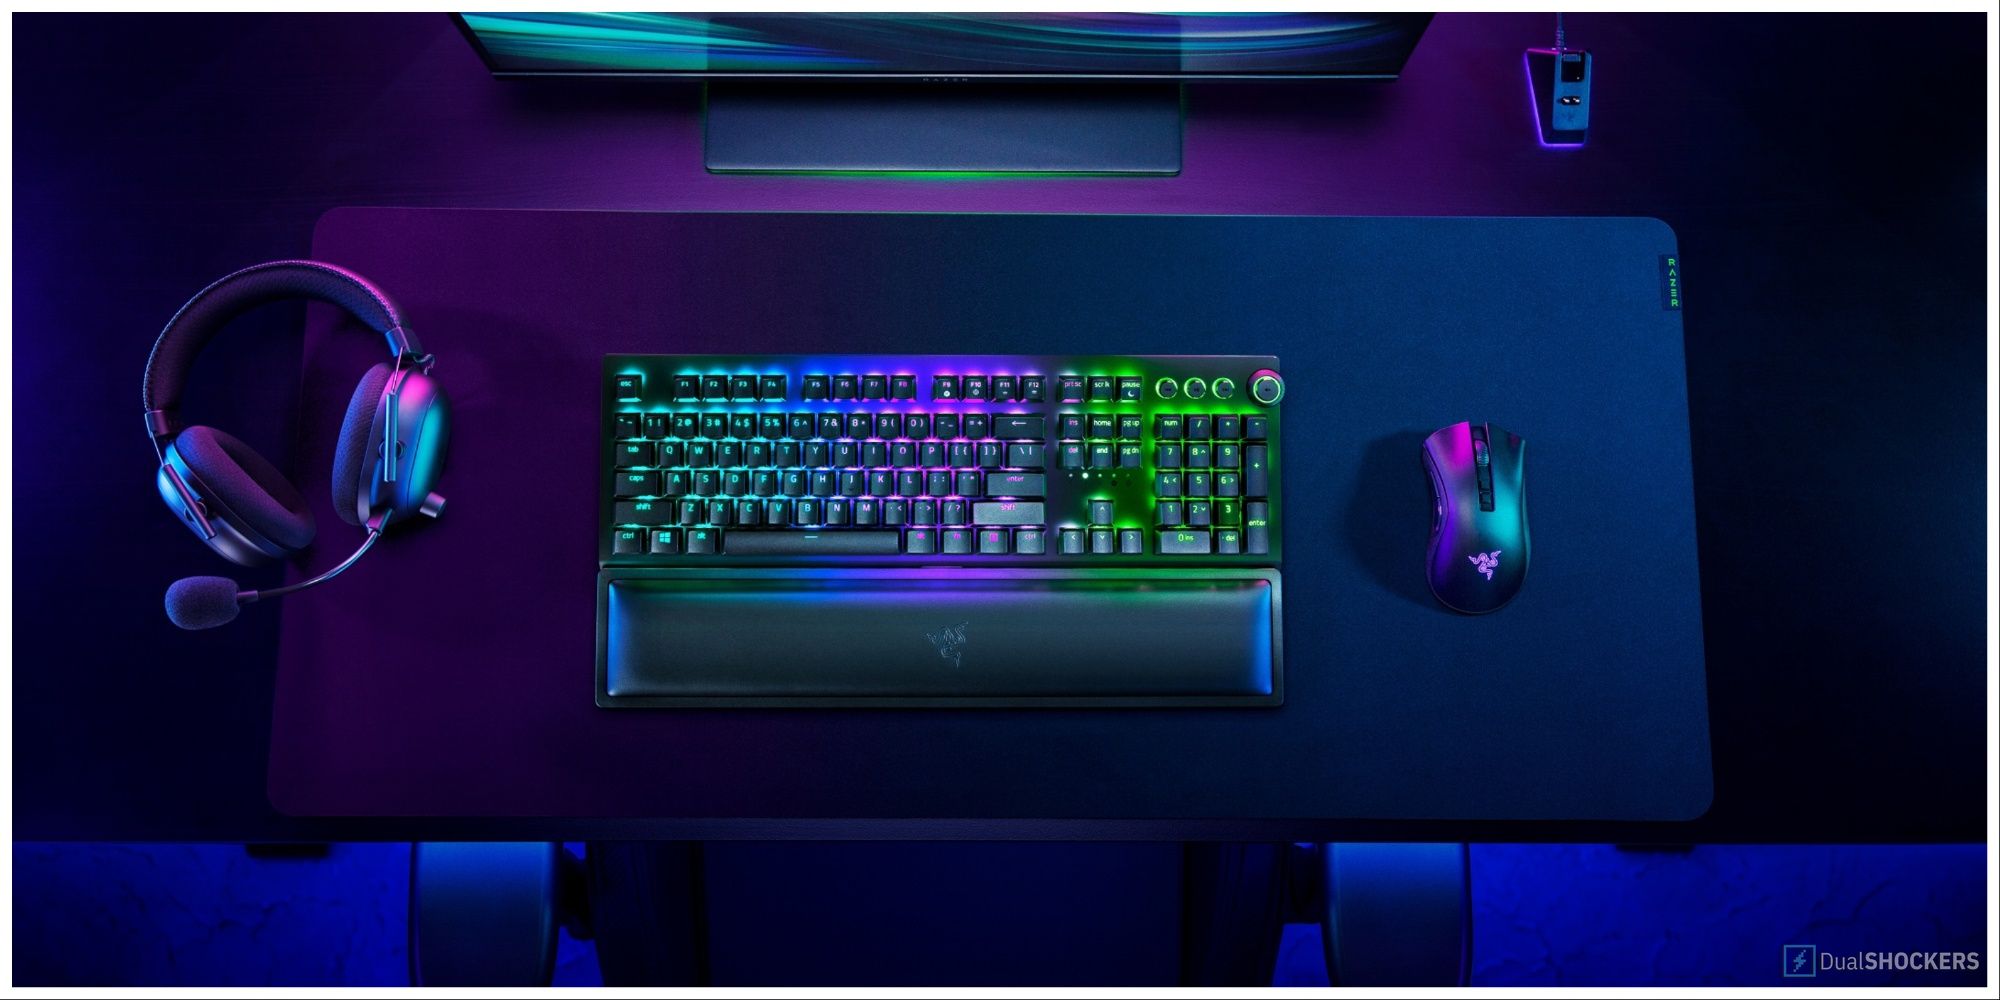 Razer headset, keyboard and mouse